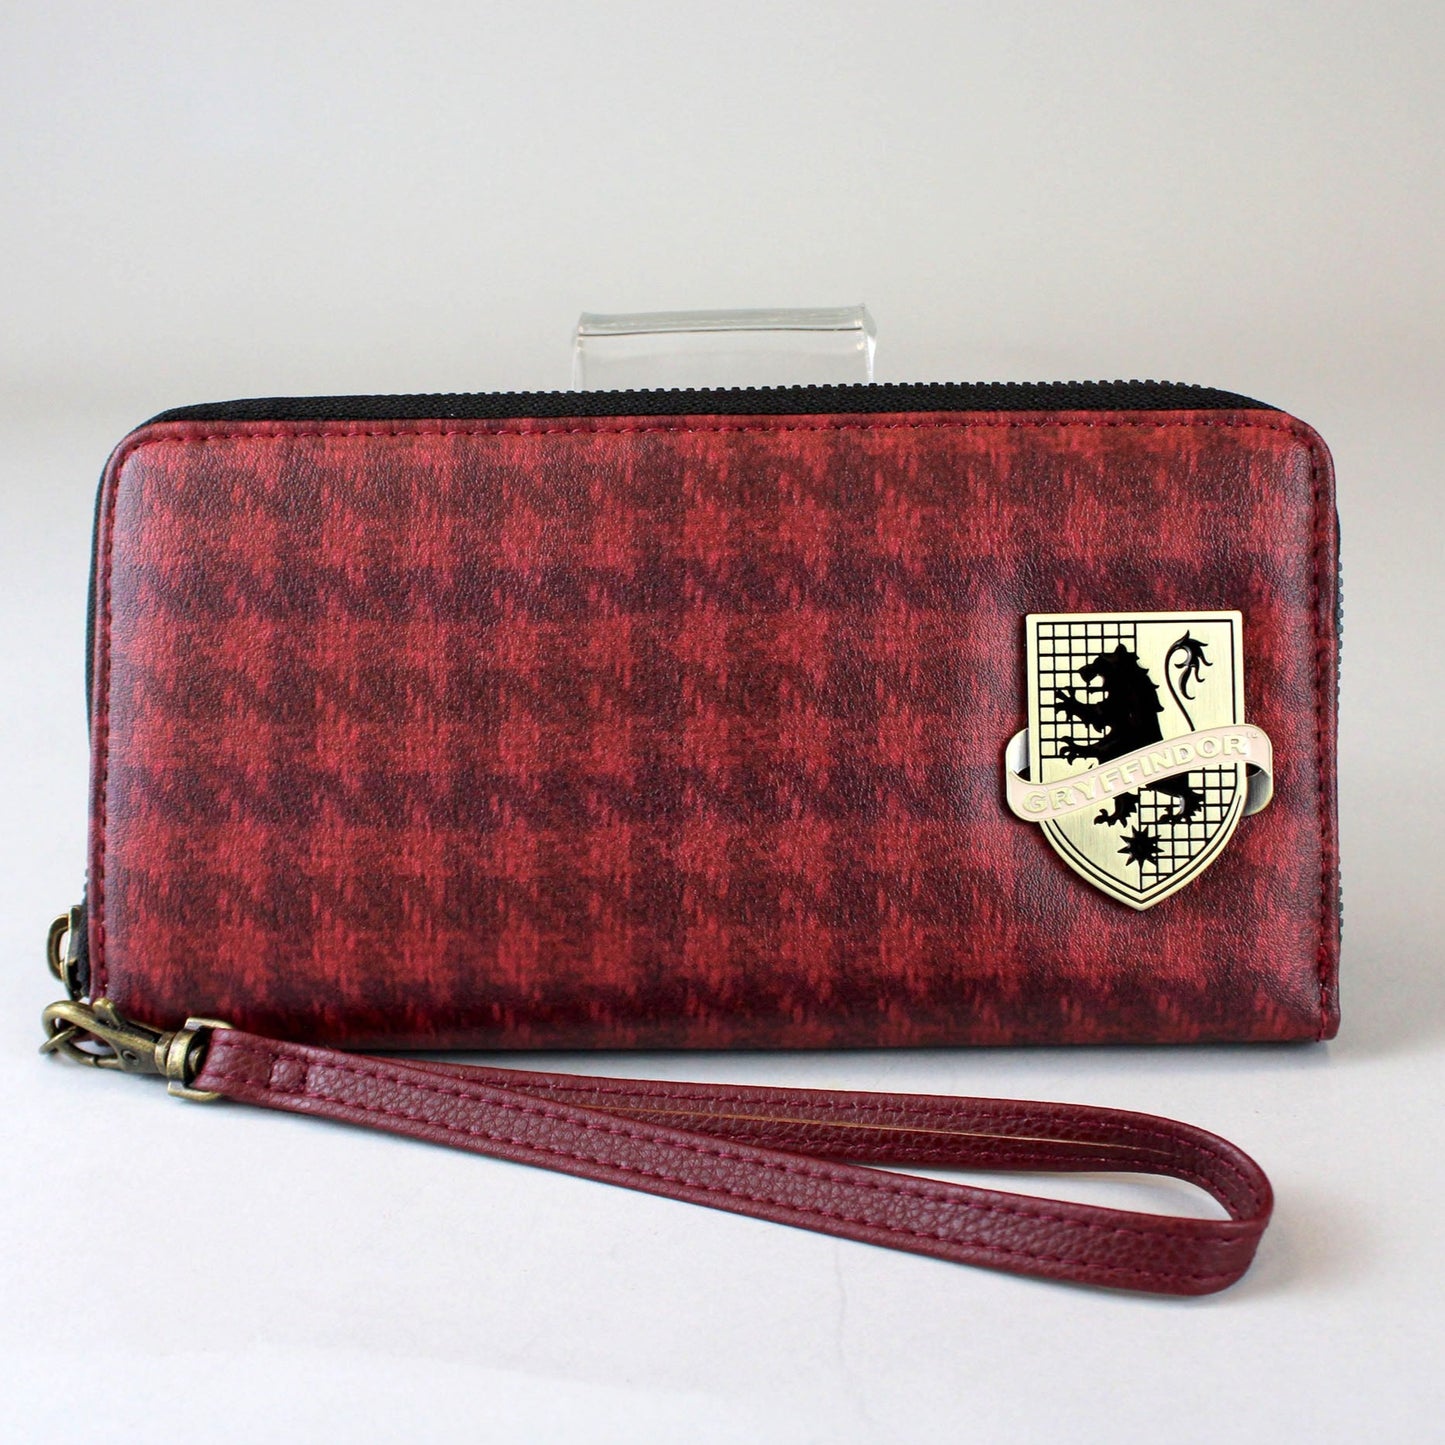 Load image into Gallery viewer, Gryffindor Badge (Harry Potter) Hogwarts House Faux Leather Wristlet Zip-Around WalletGryffindor Badge (Harry Potter) Hogwarts House Faux Leather Wristlet Zip-Around Wallet
